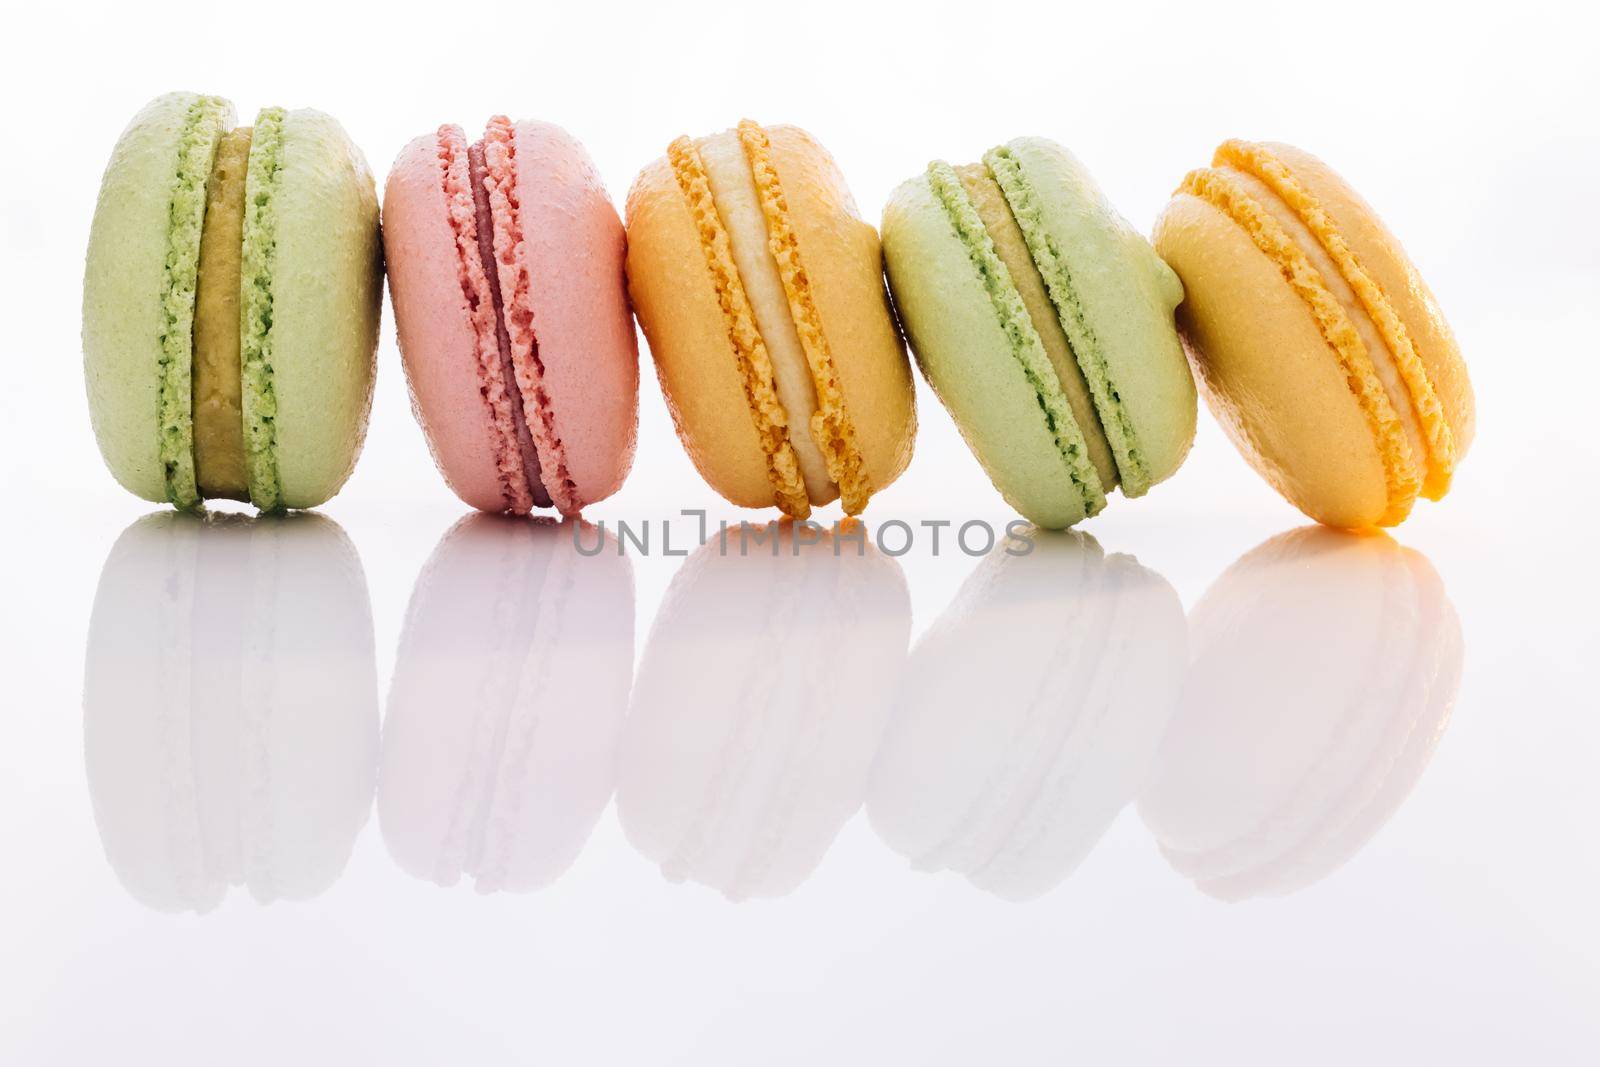 Tasty sweet color macaron. Colorful macarons dessert. French macarons on white background. Different colorful macaroon by uflypro